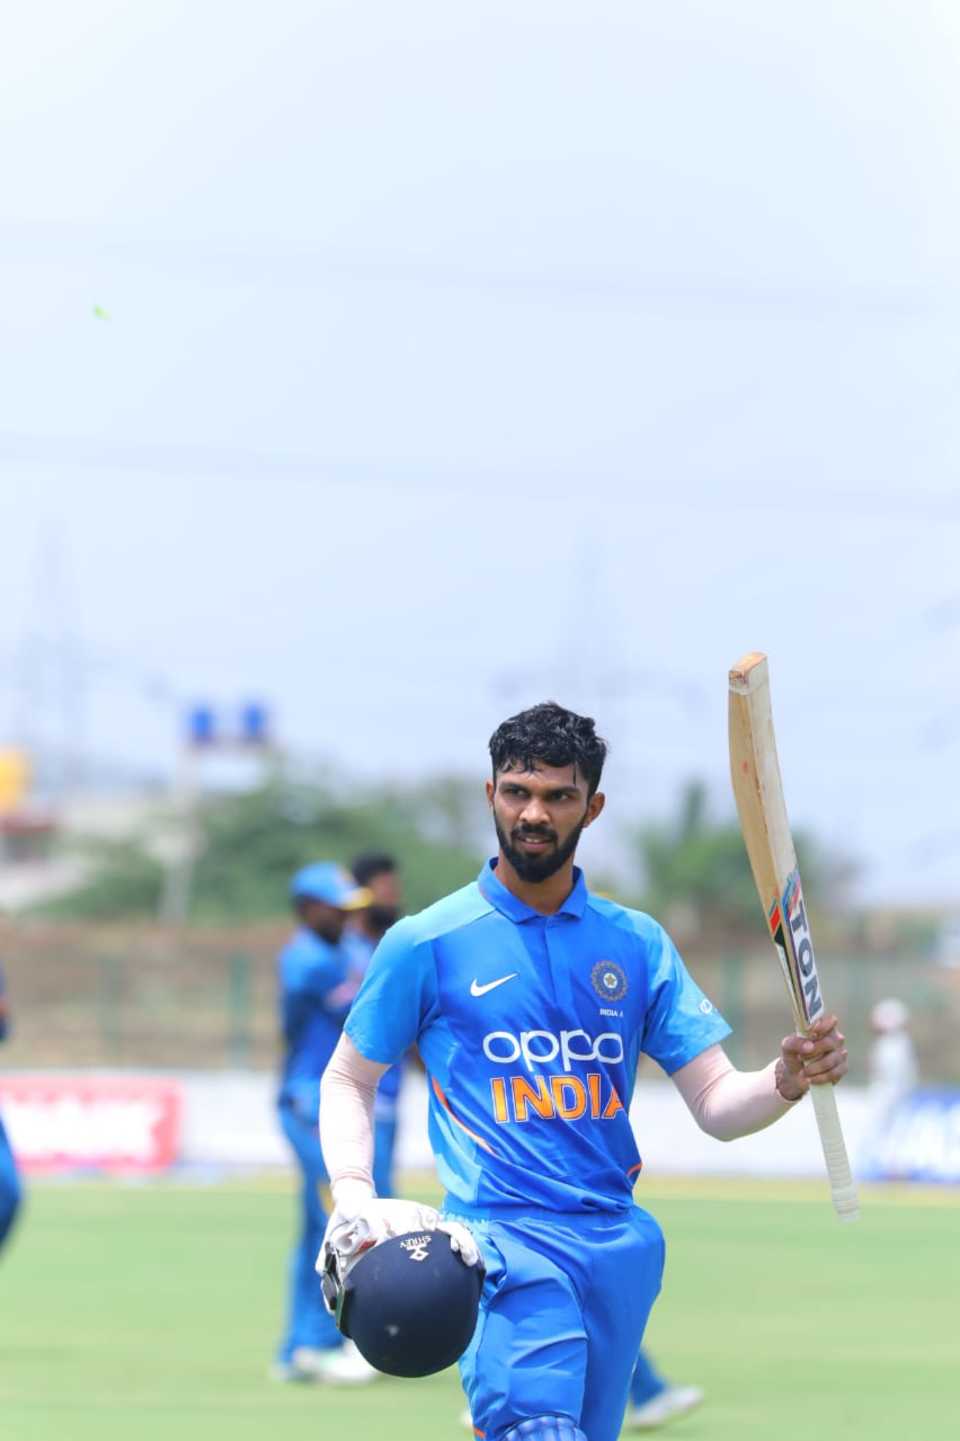 Ruturaj Gaikwad acknowledges the applause after his century